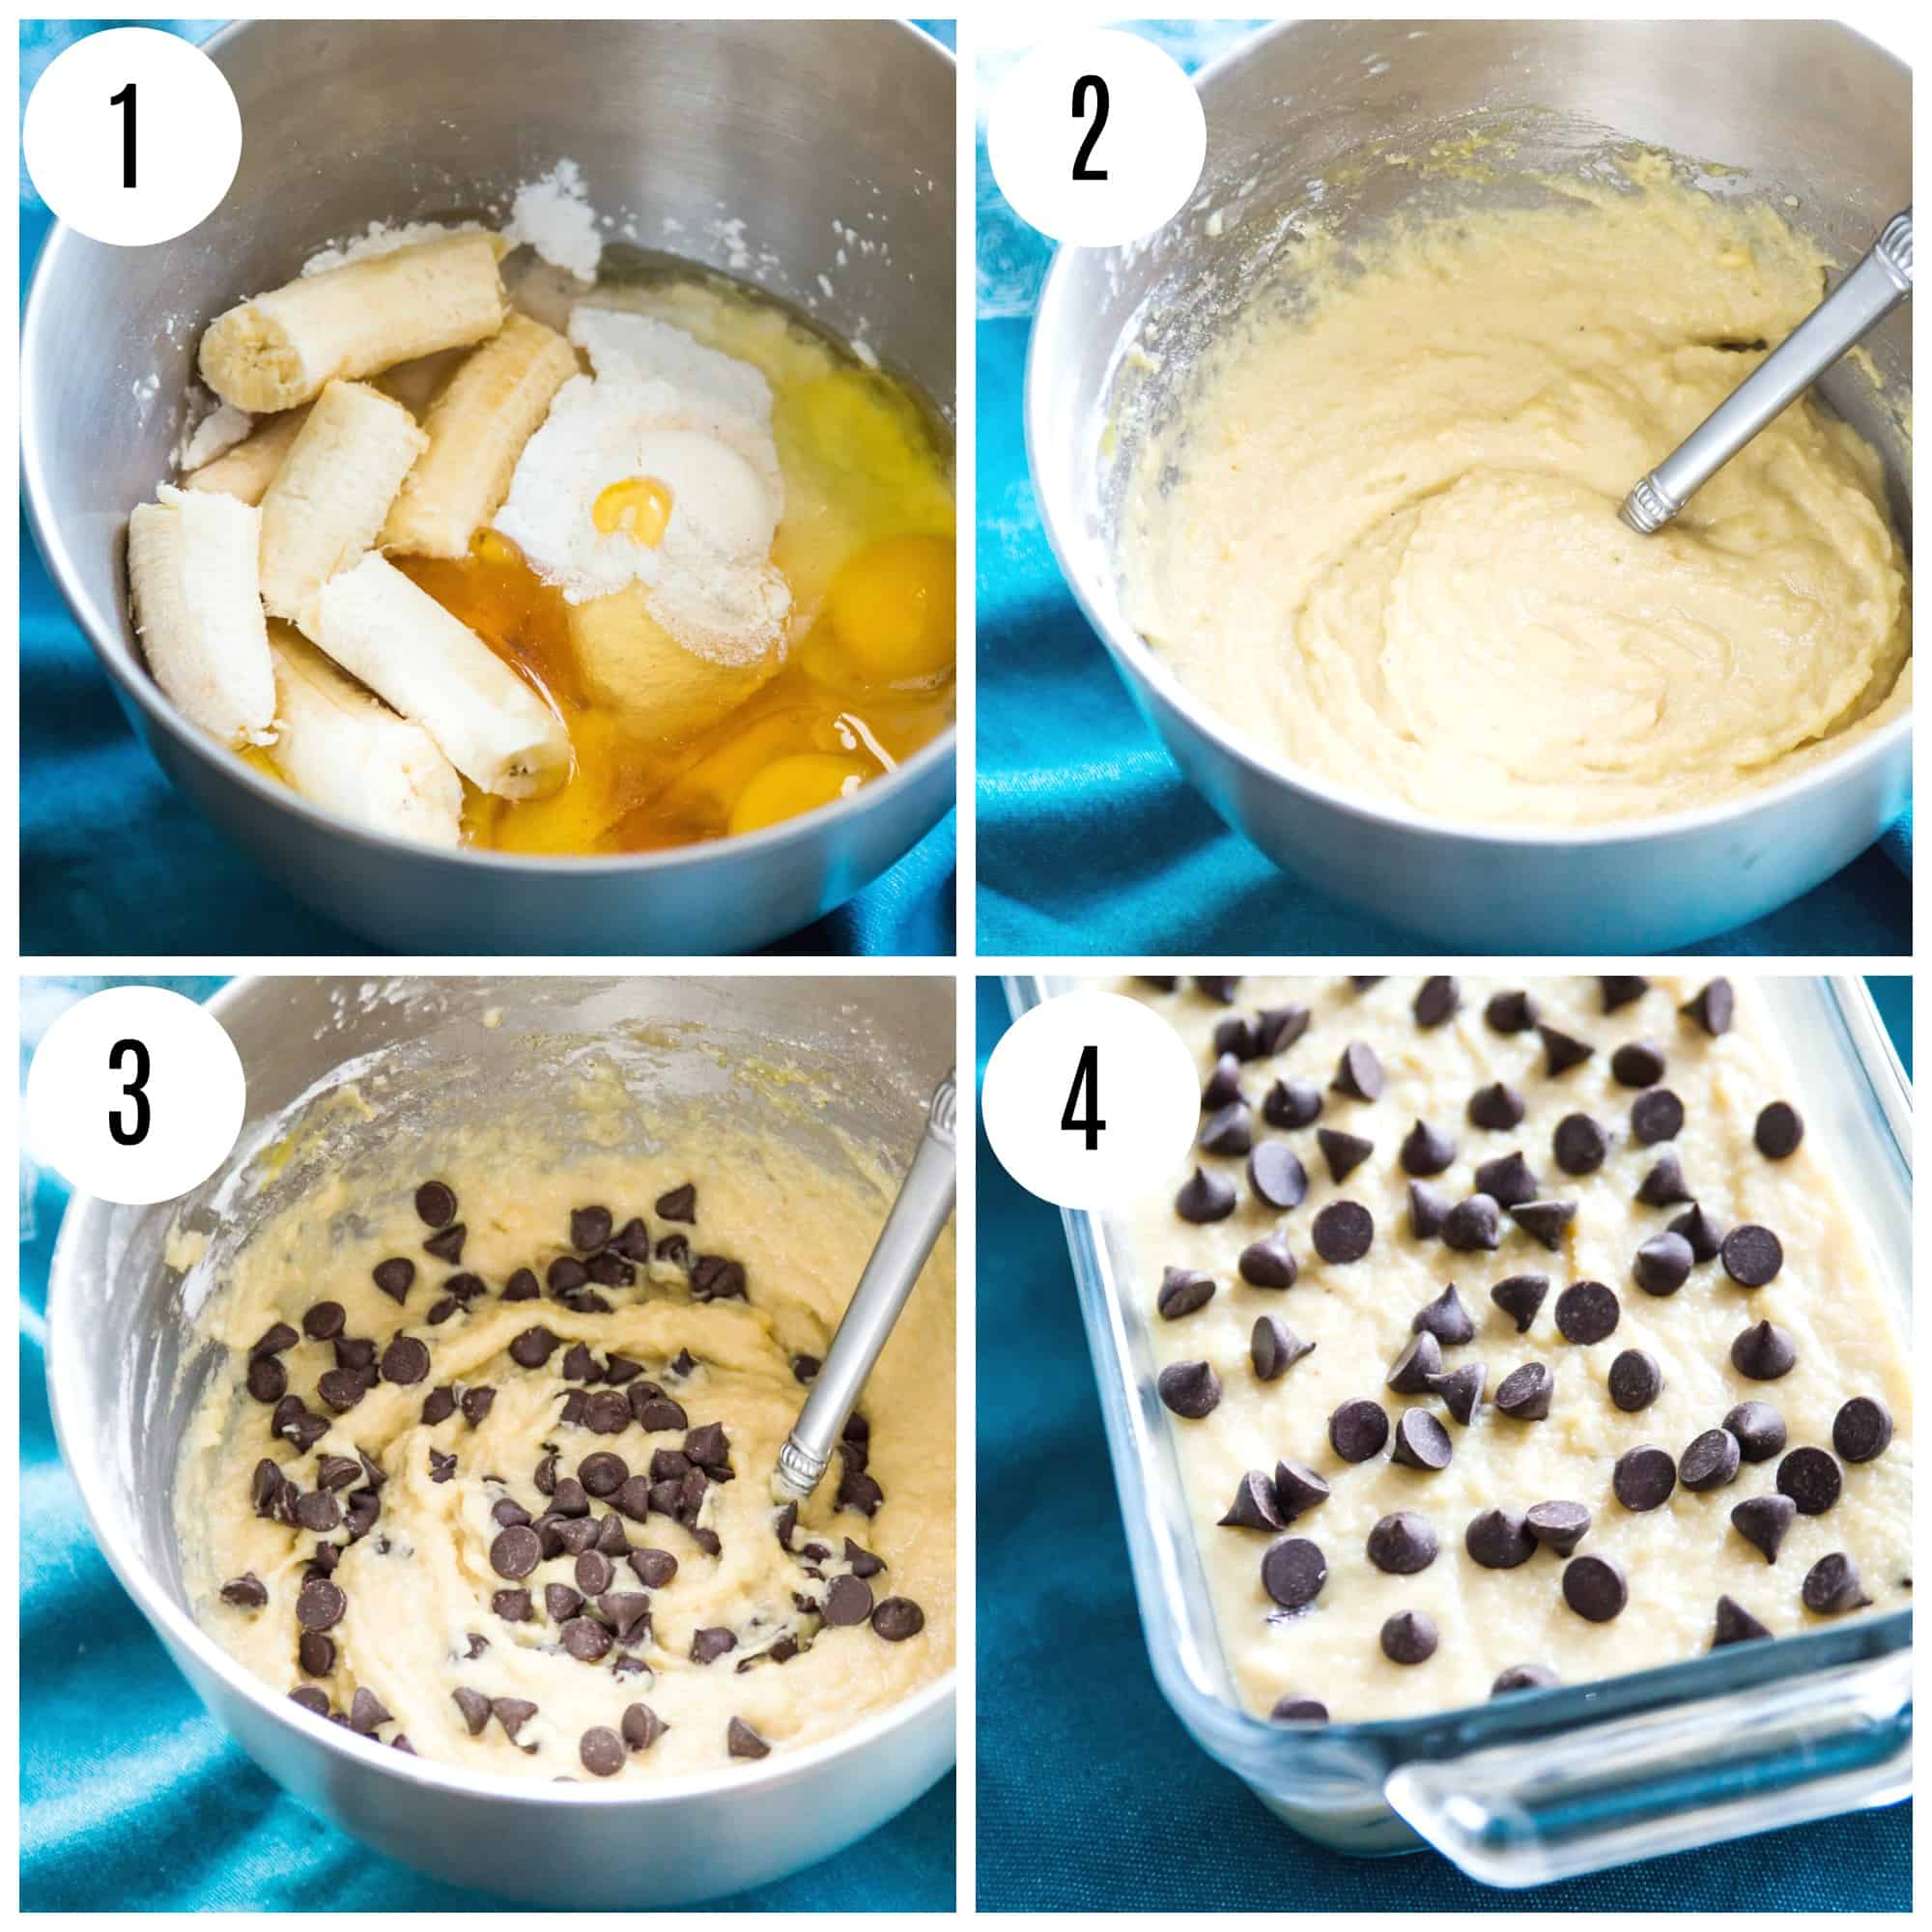 Step by step directions for making gluten free chocolate chip banana bread.